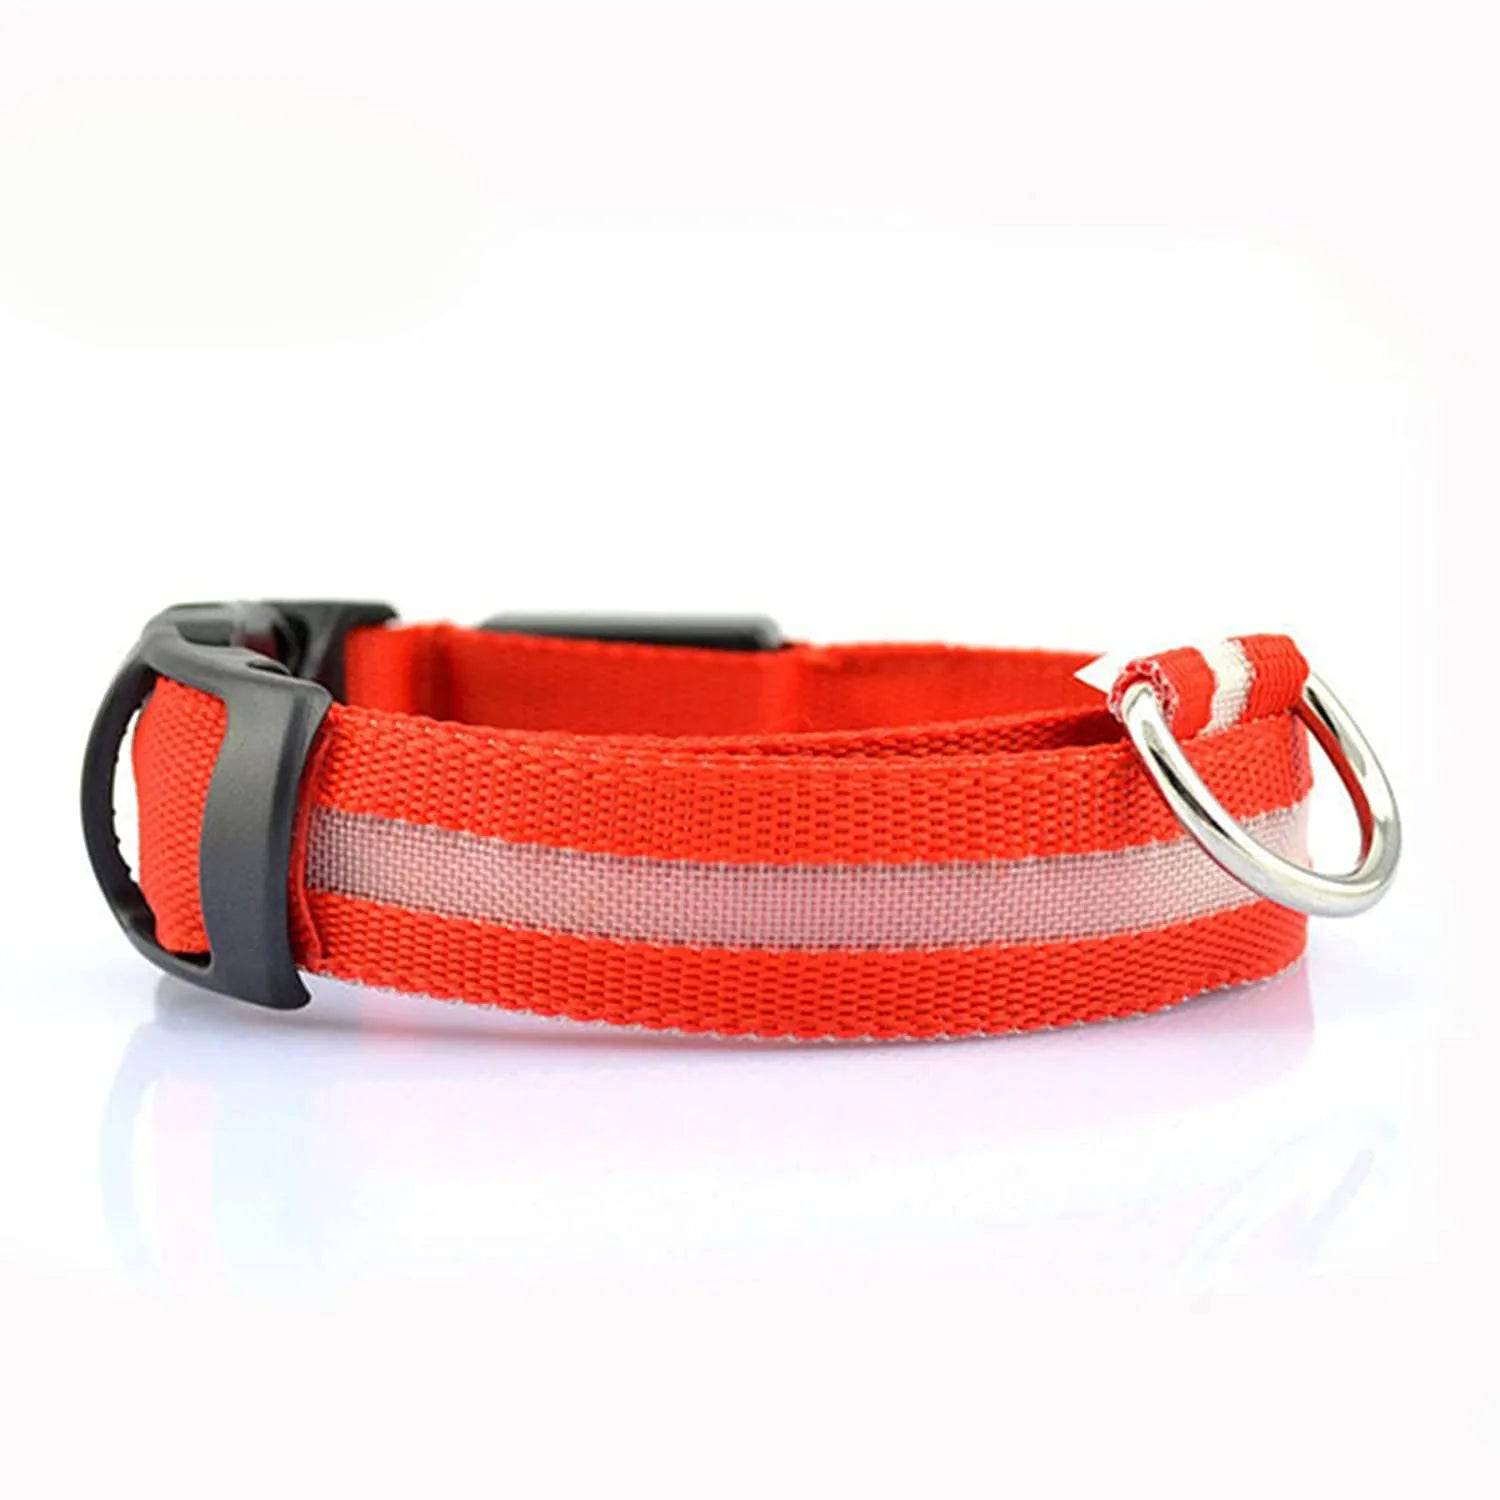 GlowGuard LED Dog Collar: Keep Your Pet Safe and Stylish in the Dark Red battery / XS neck 28-40cm - IHavePaws